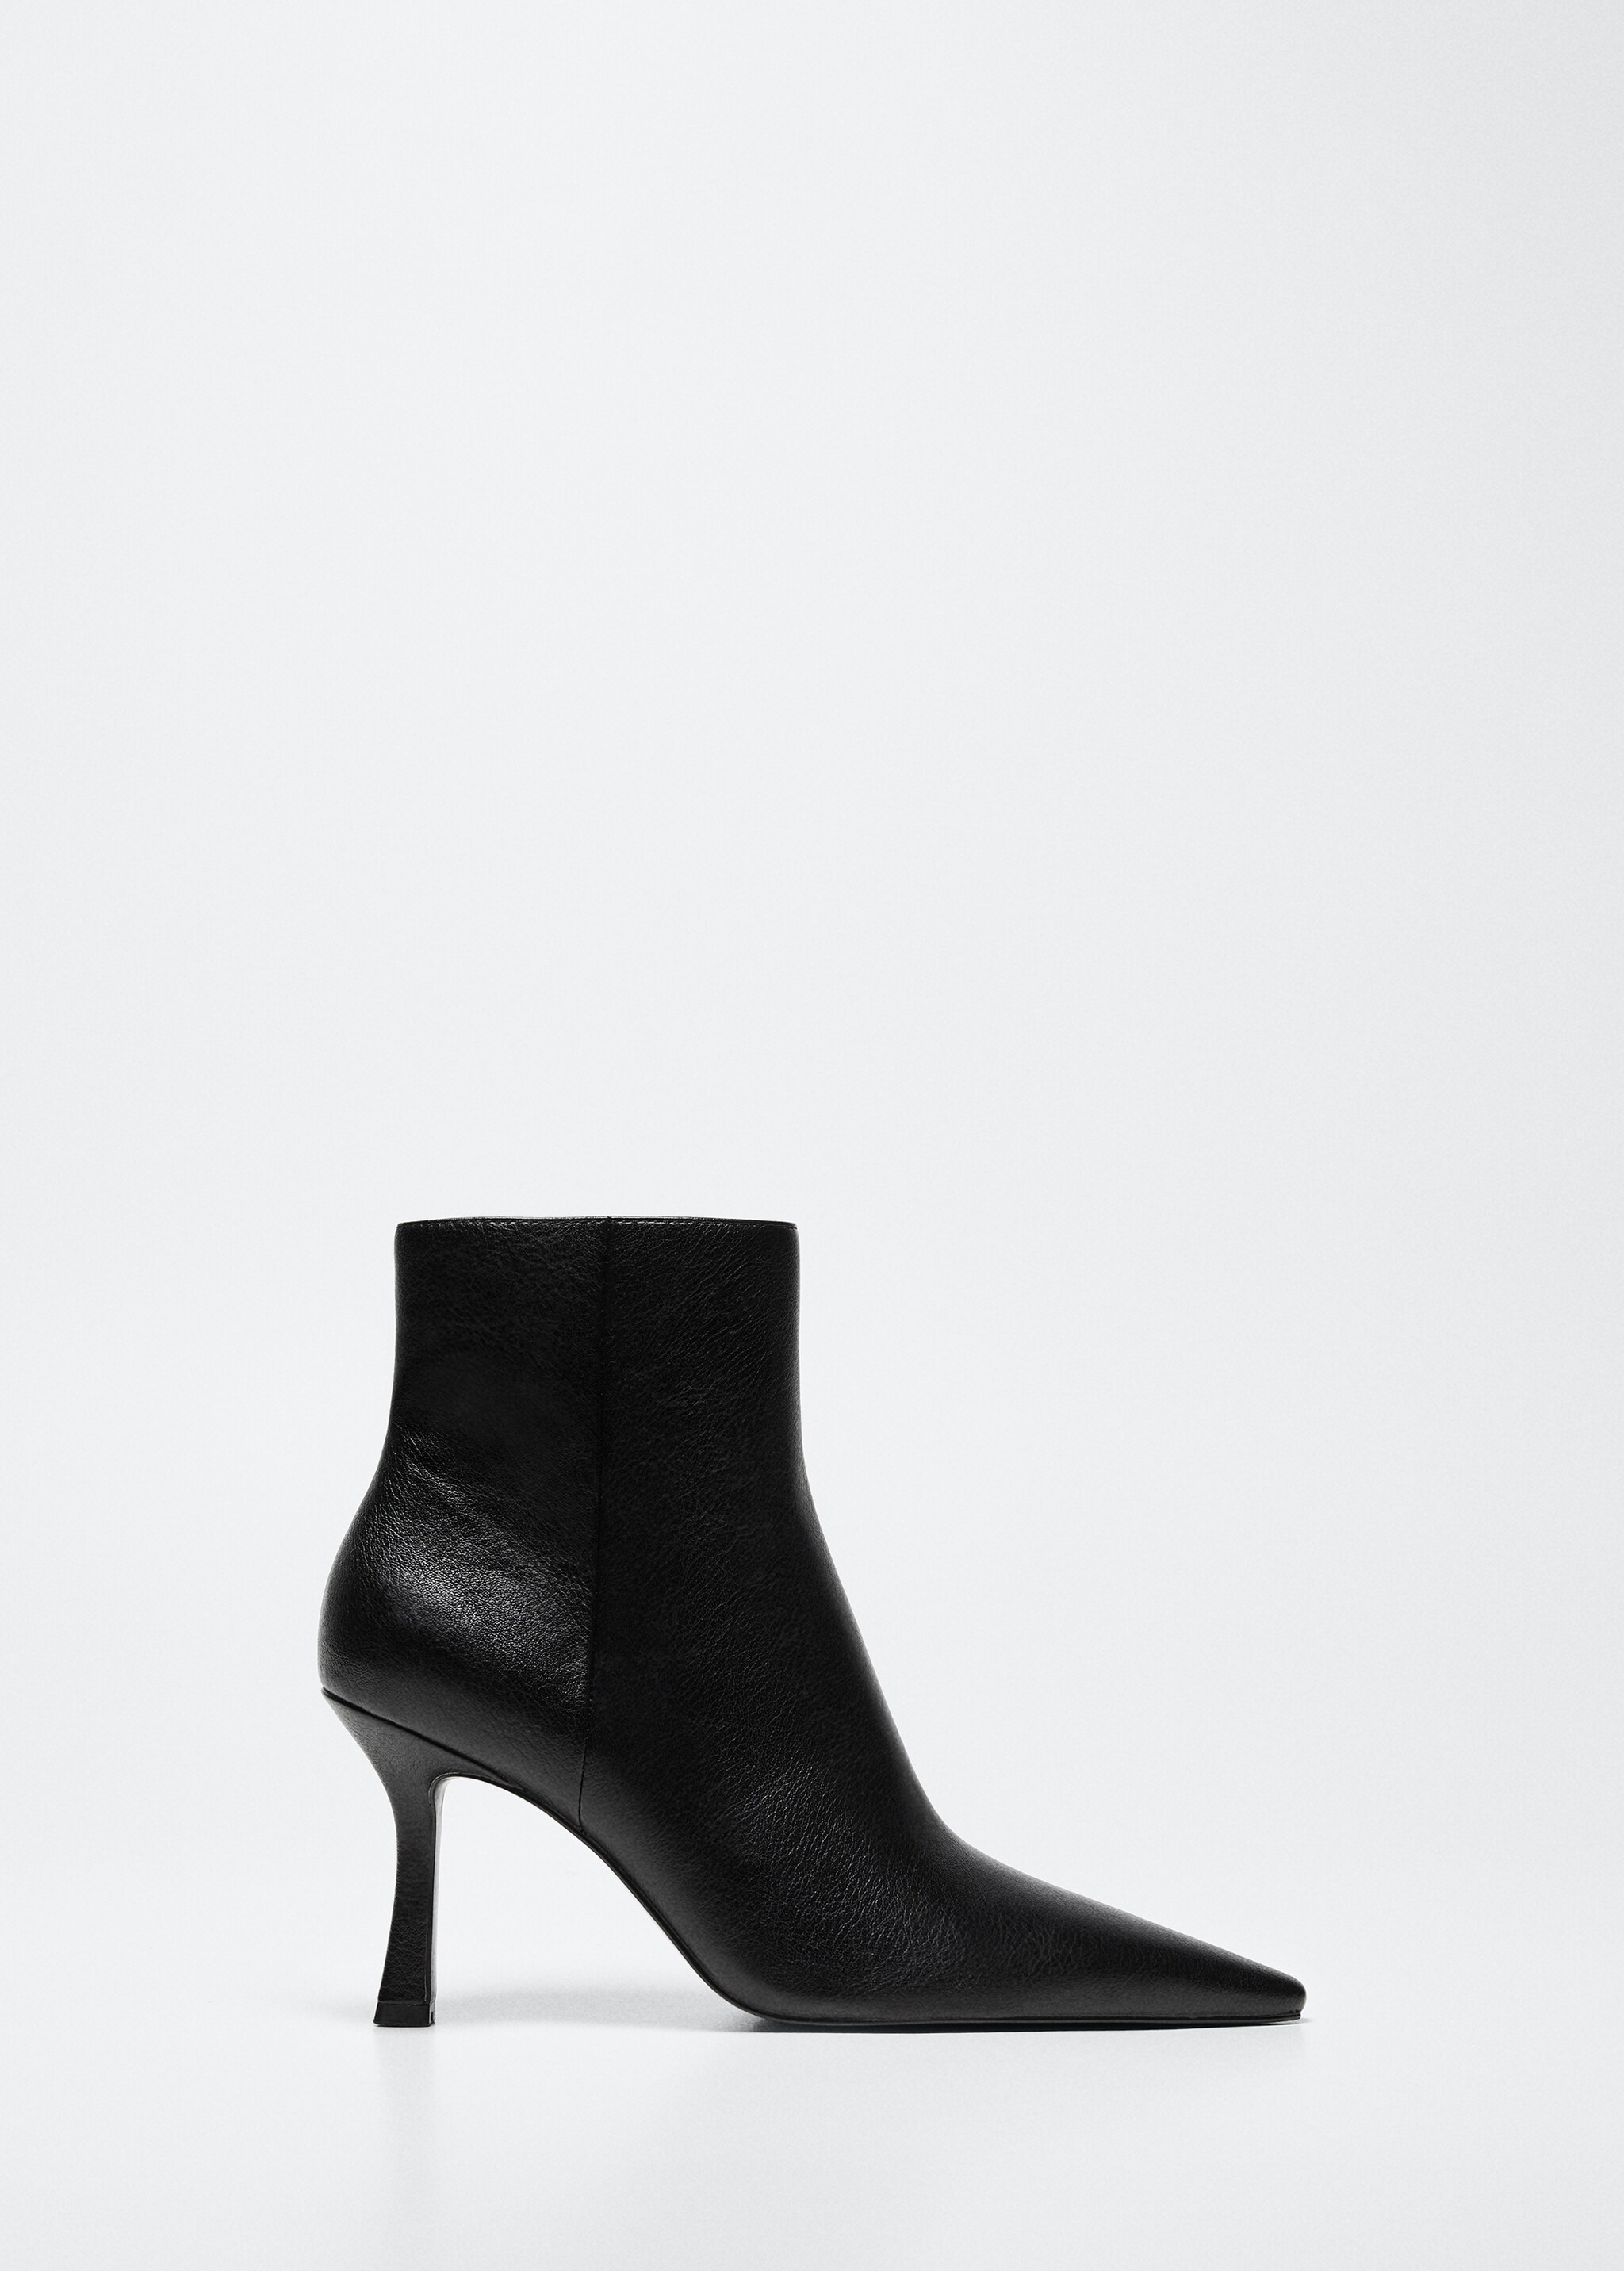 Heel zipped boots - Article without model